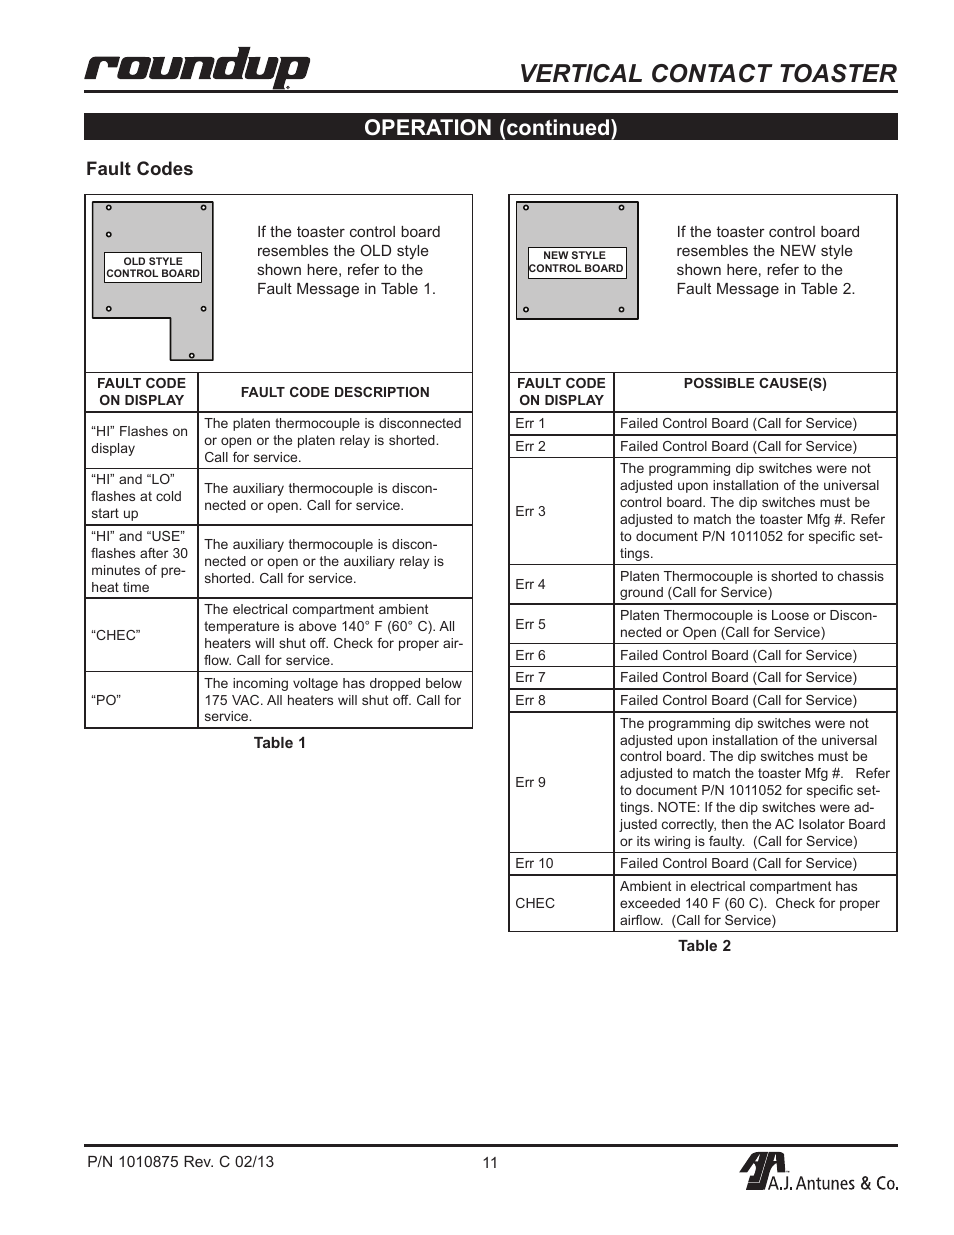 Vertical contact toaster, Operation (continued), Fault codes | A.J. Antunes  & Co VCT-2000 9210212 User Manual | Page 11 / 28